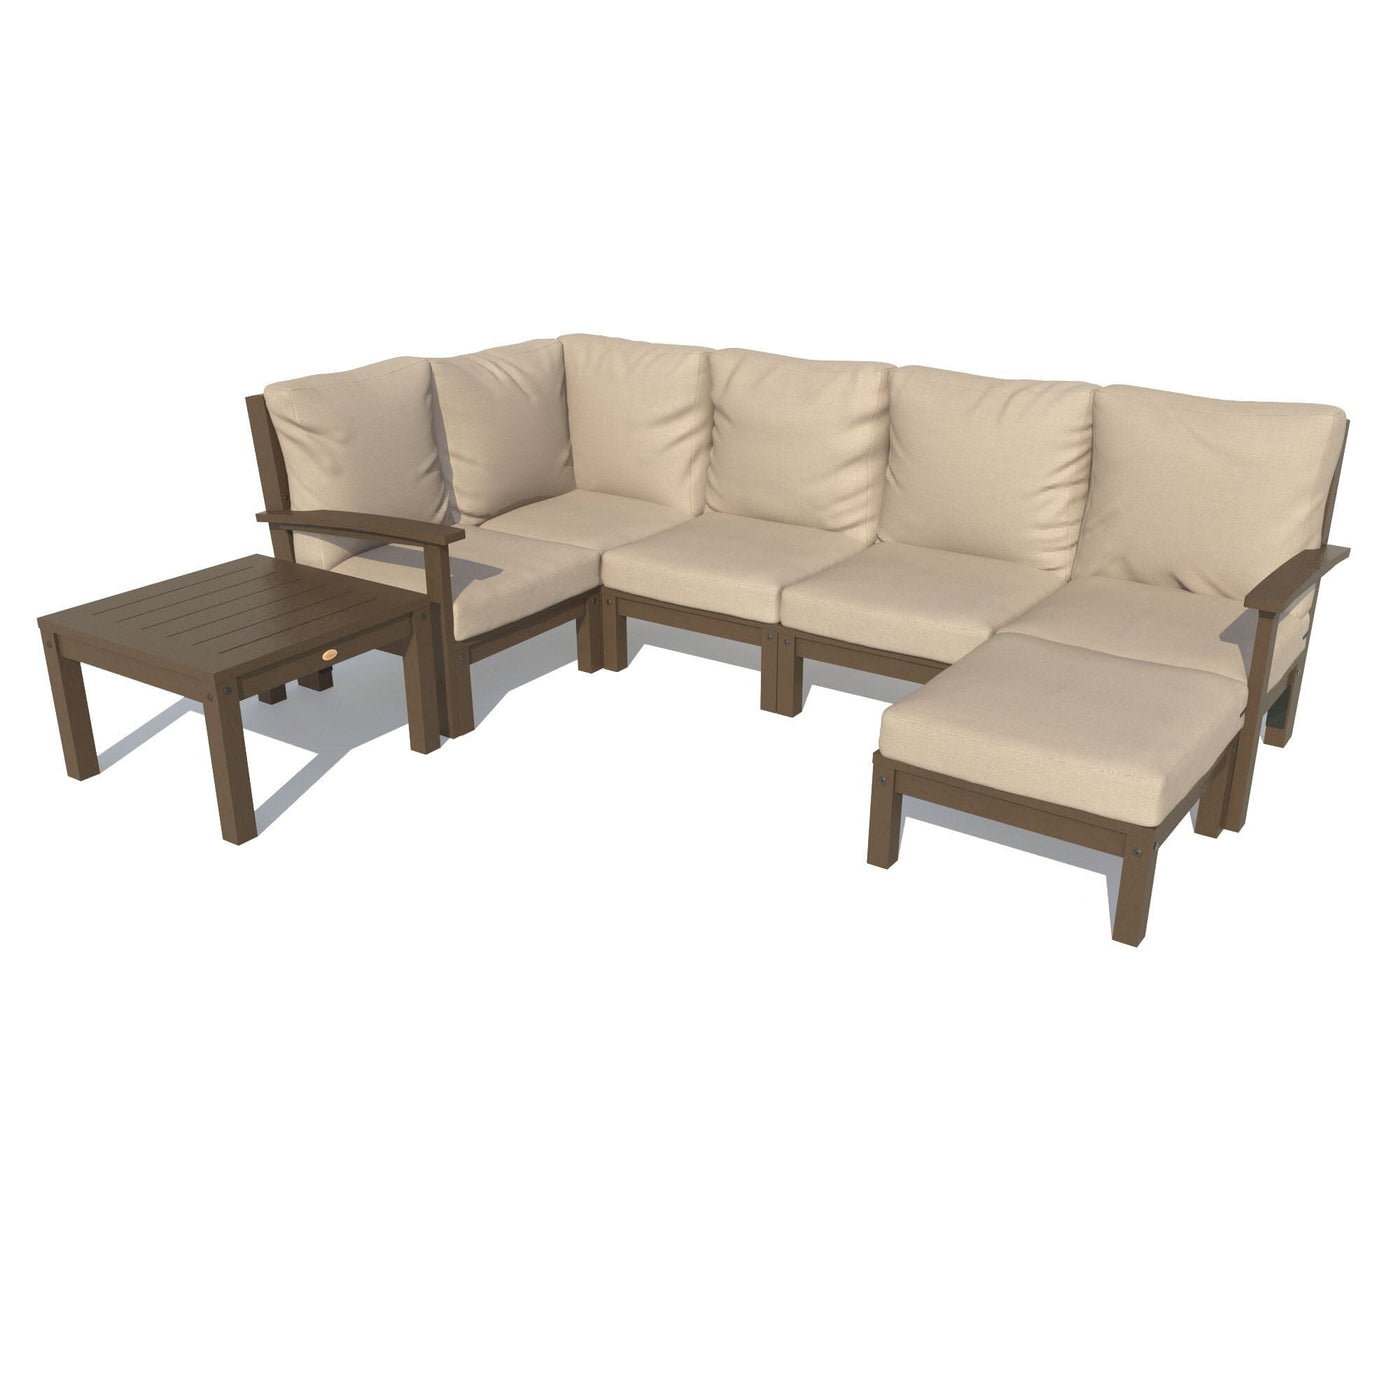 Bespoke Deep Seating: 7 Piece Sectional Set with Ottoman and Side Table Deep Seating Highwood USA Driftwood Weathered Acorn 